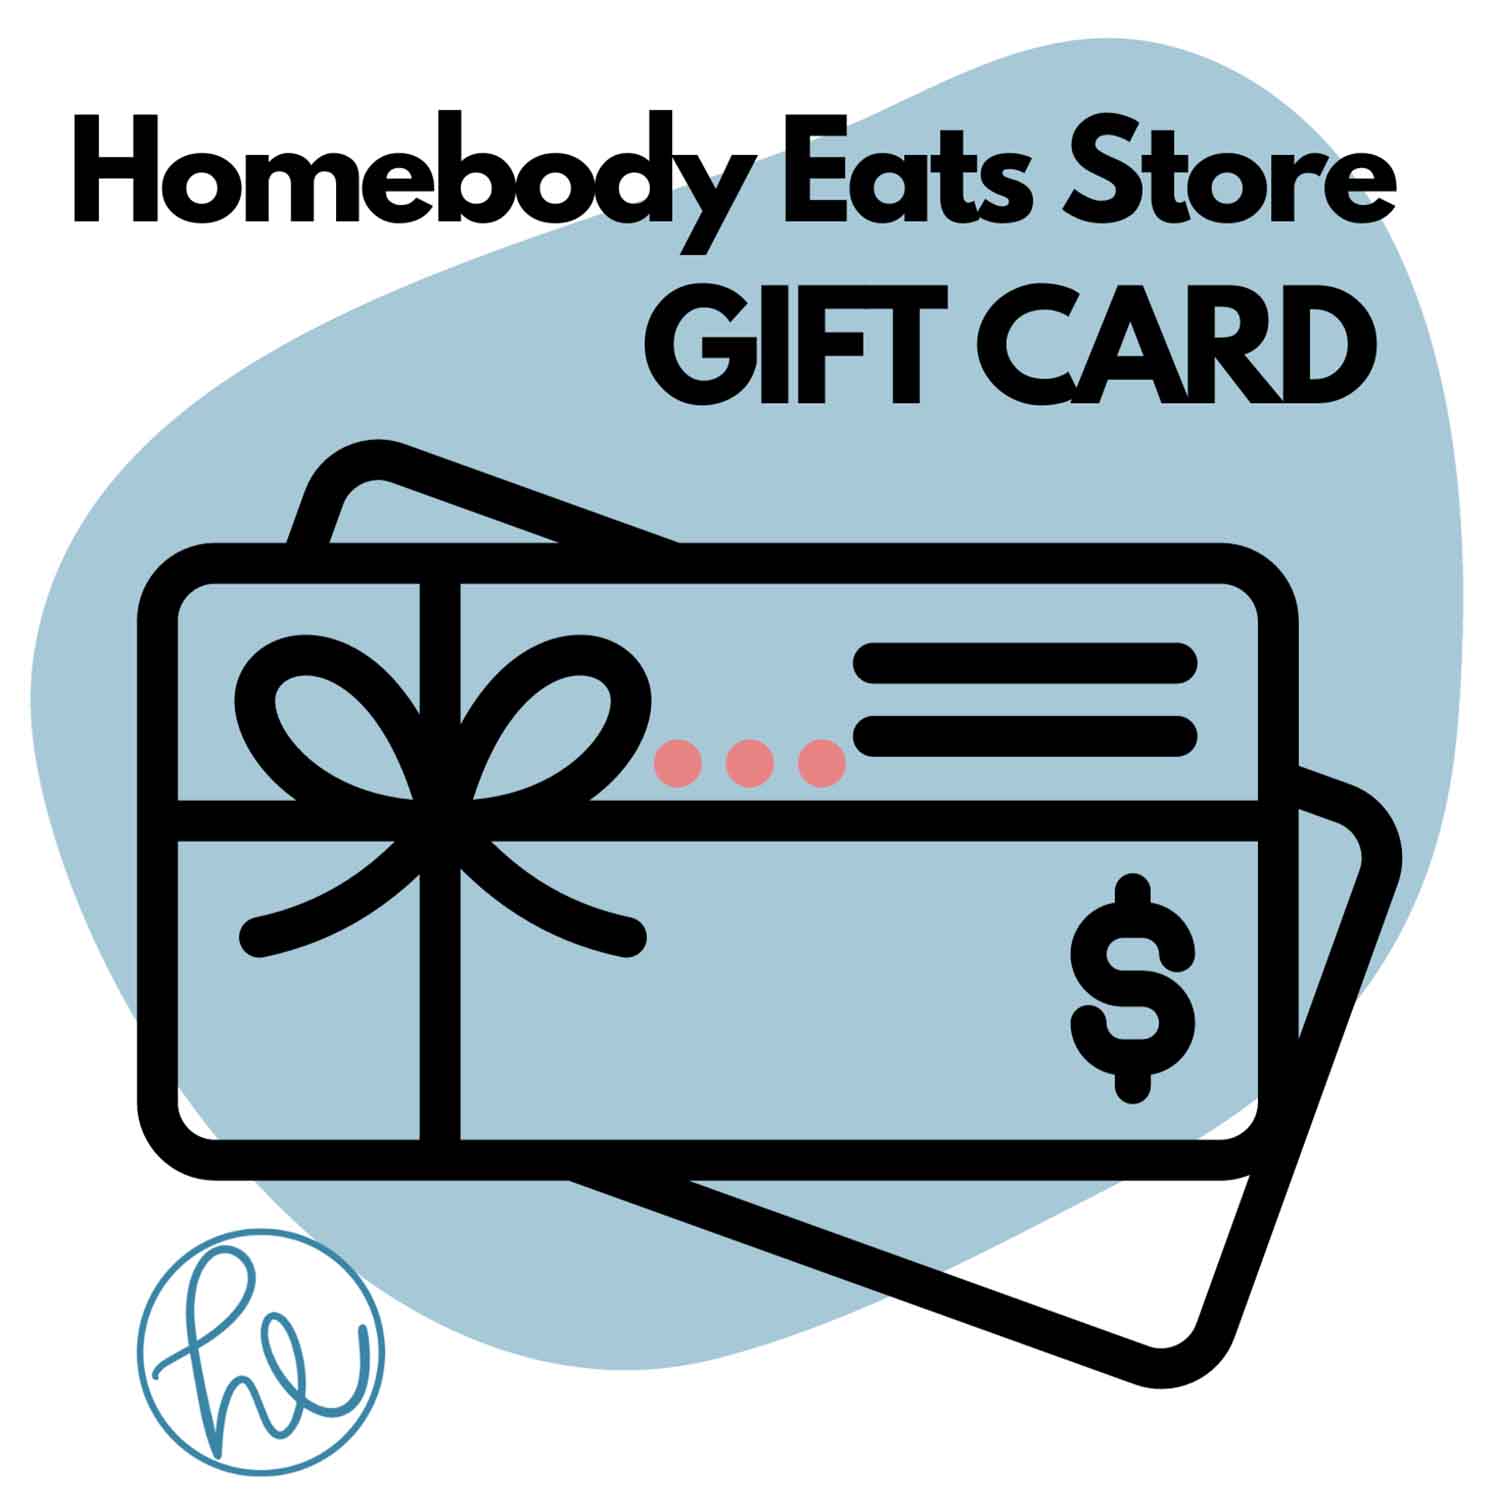 The Homebody Eats Store Gift Card promotional image.